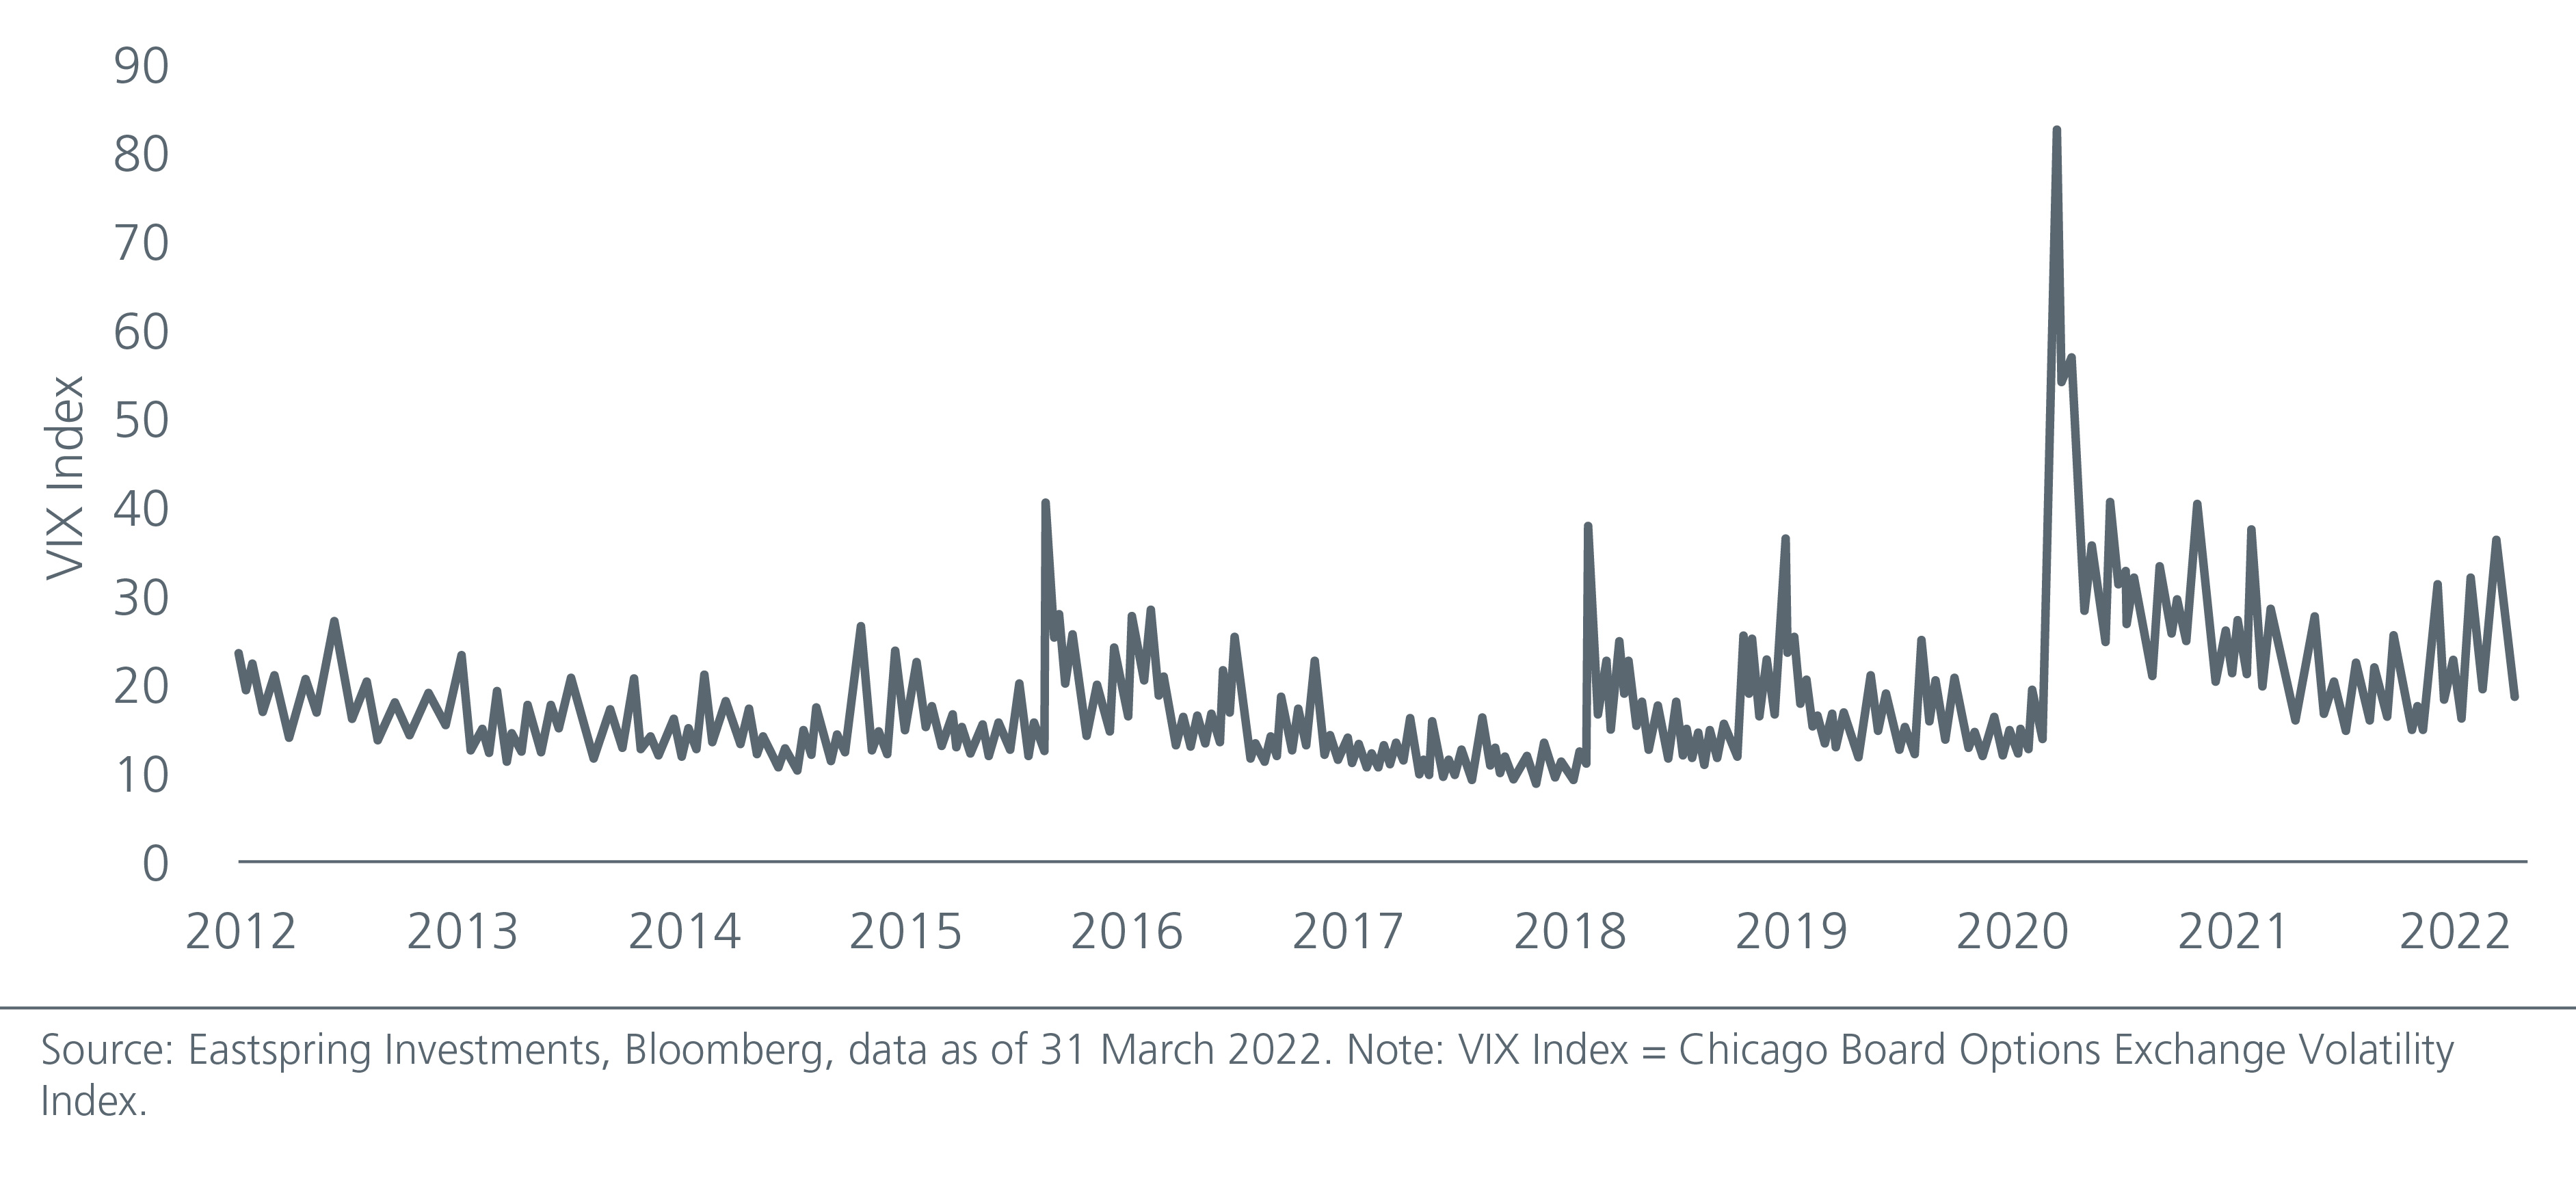 Volatility has spiked since March 2020